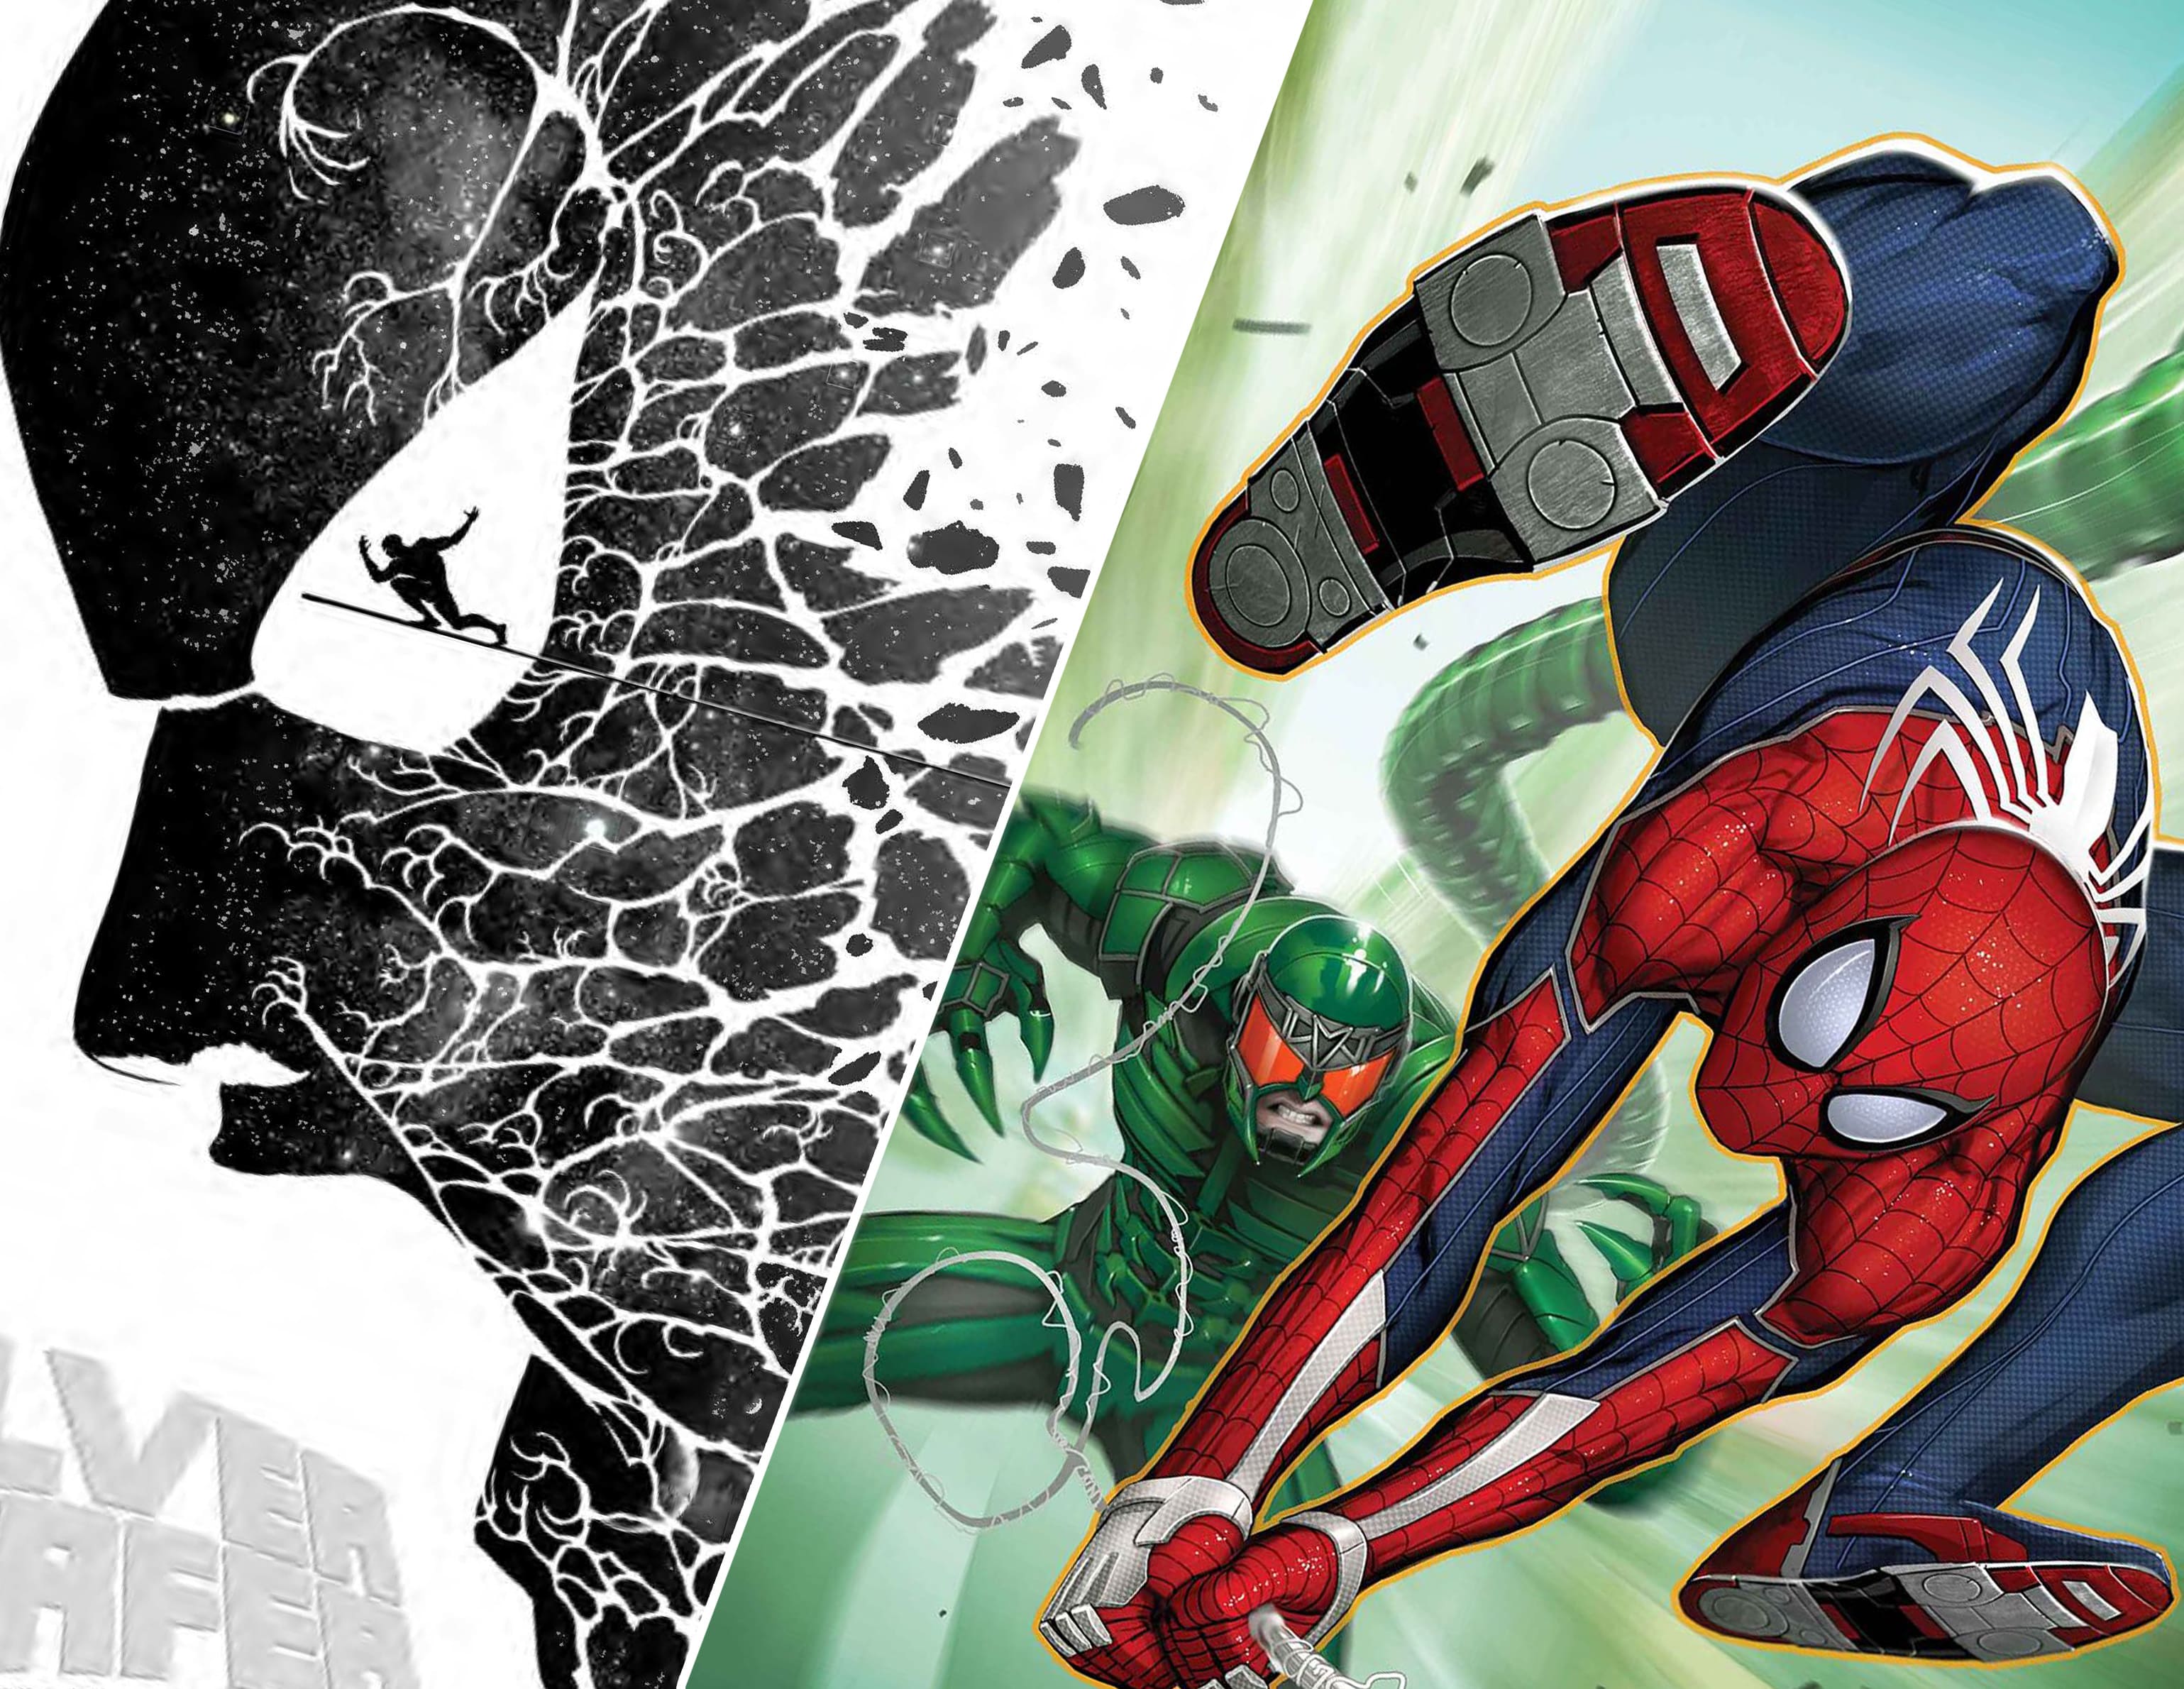 AiPT! Comics Podcast Episode 29: SDCC 2019 preview, Spidey rogues ranked, & Joker revealed